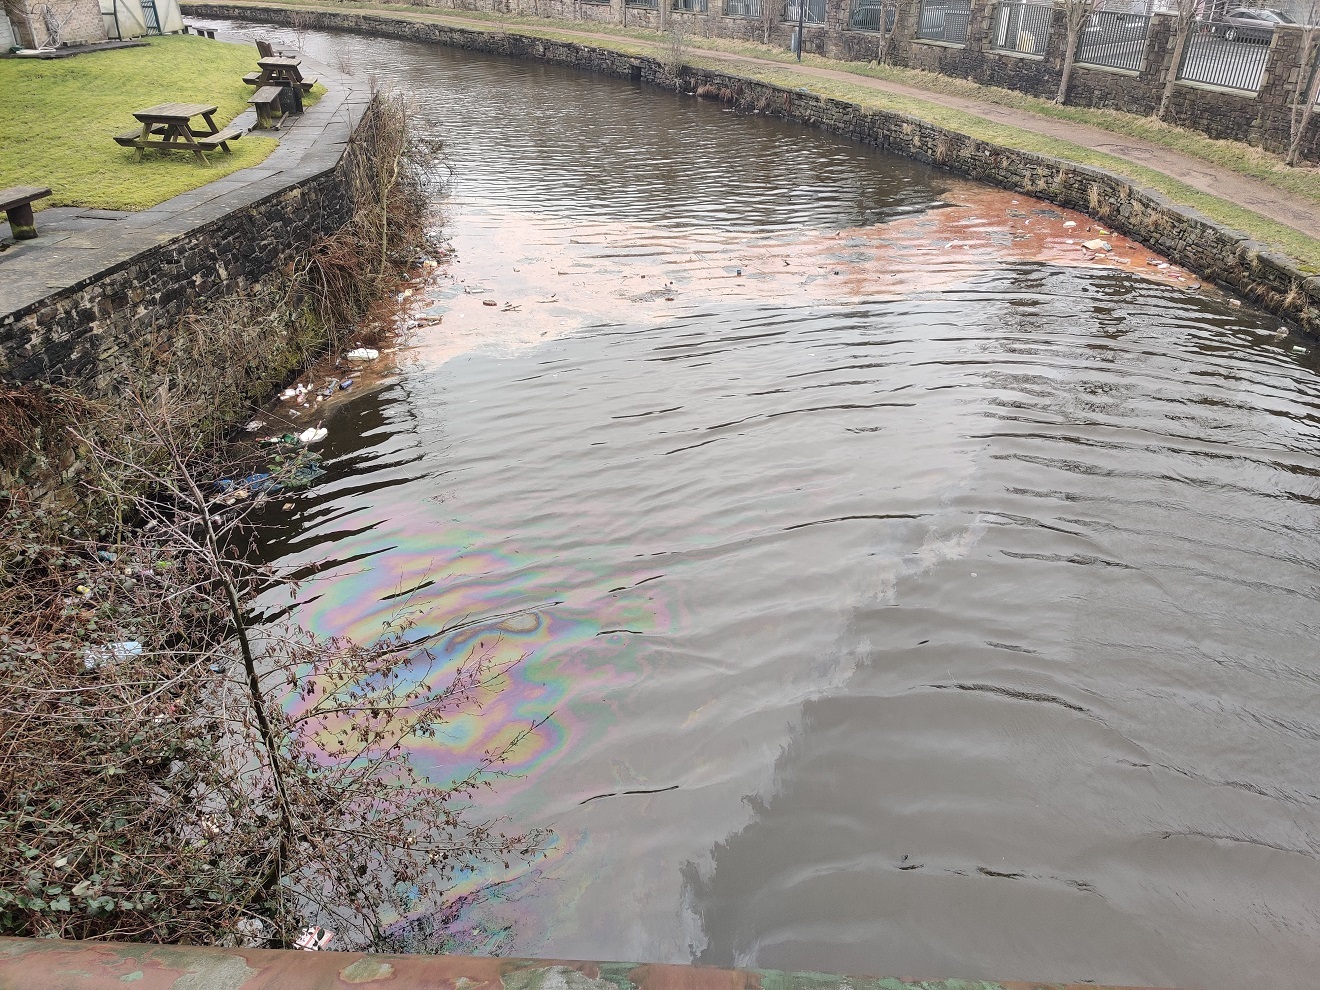 The suspected chemical spill in the Leeds Liverpool Canal in Blackburn